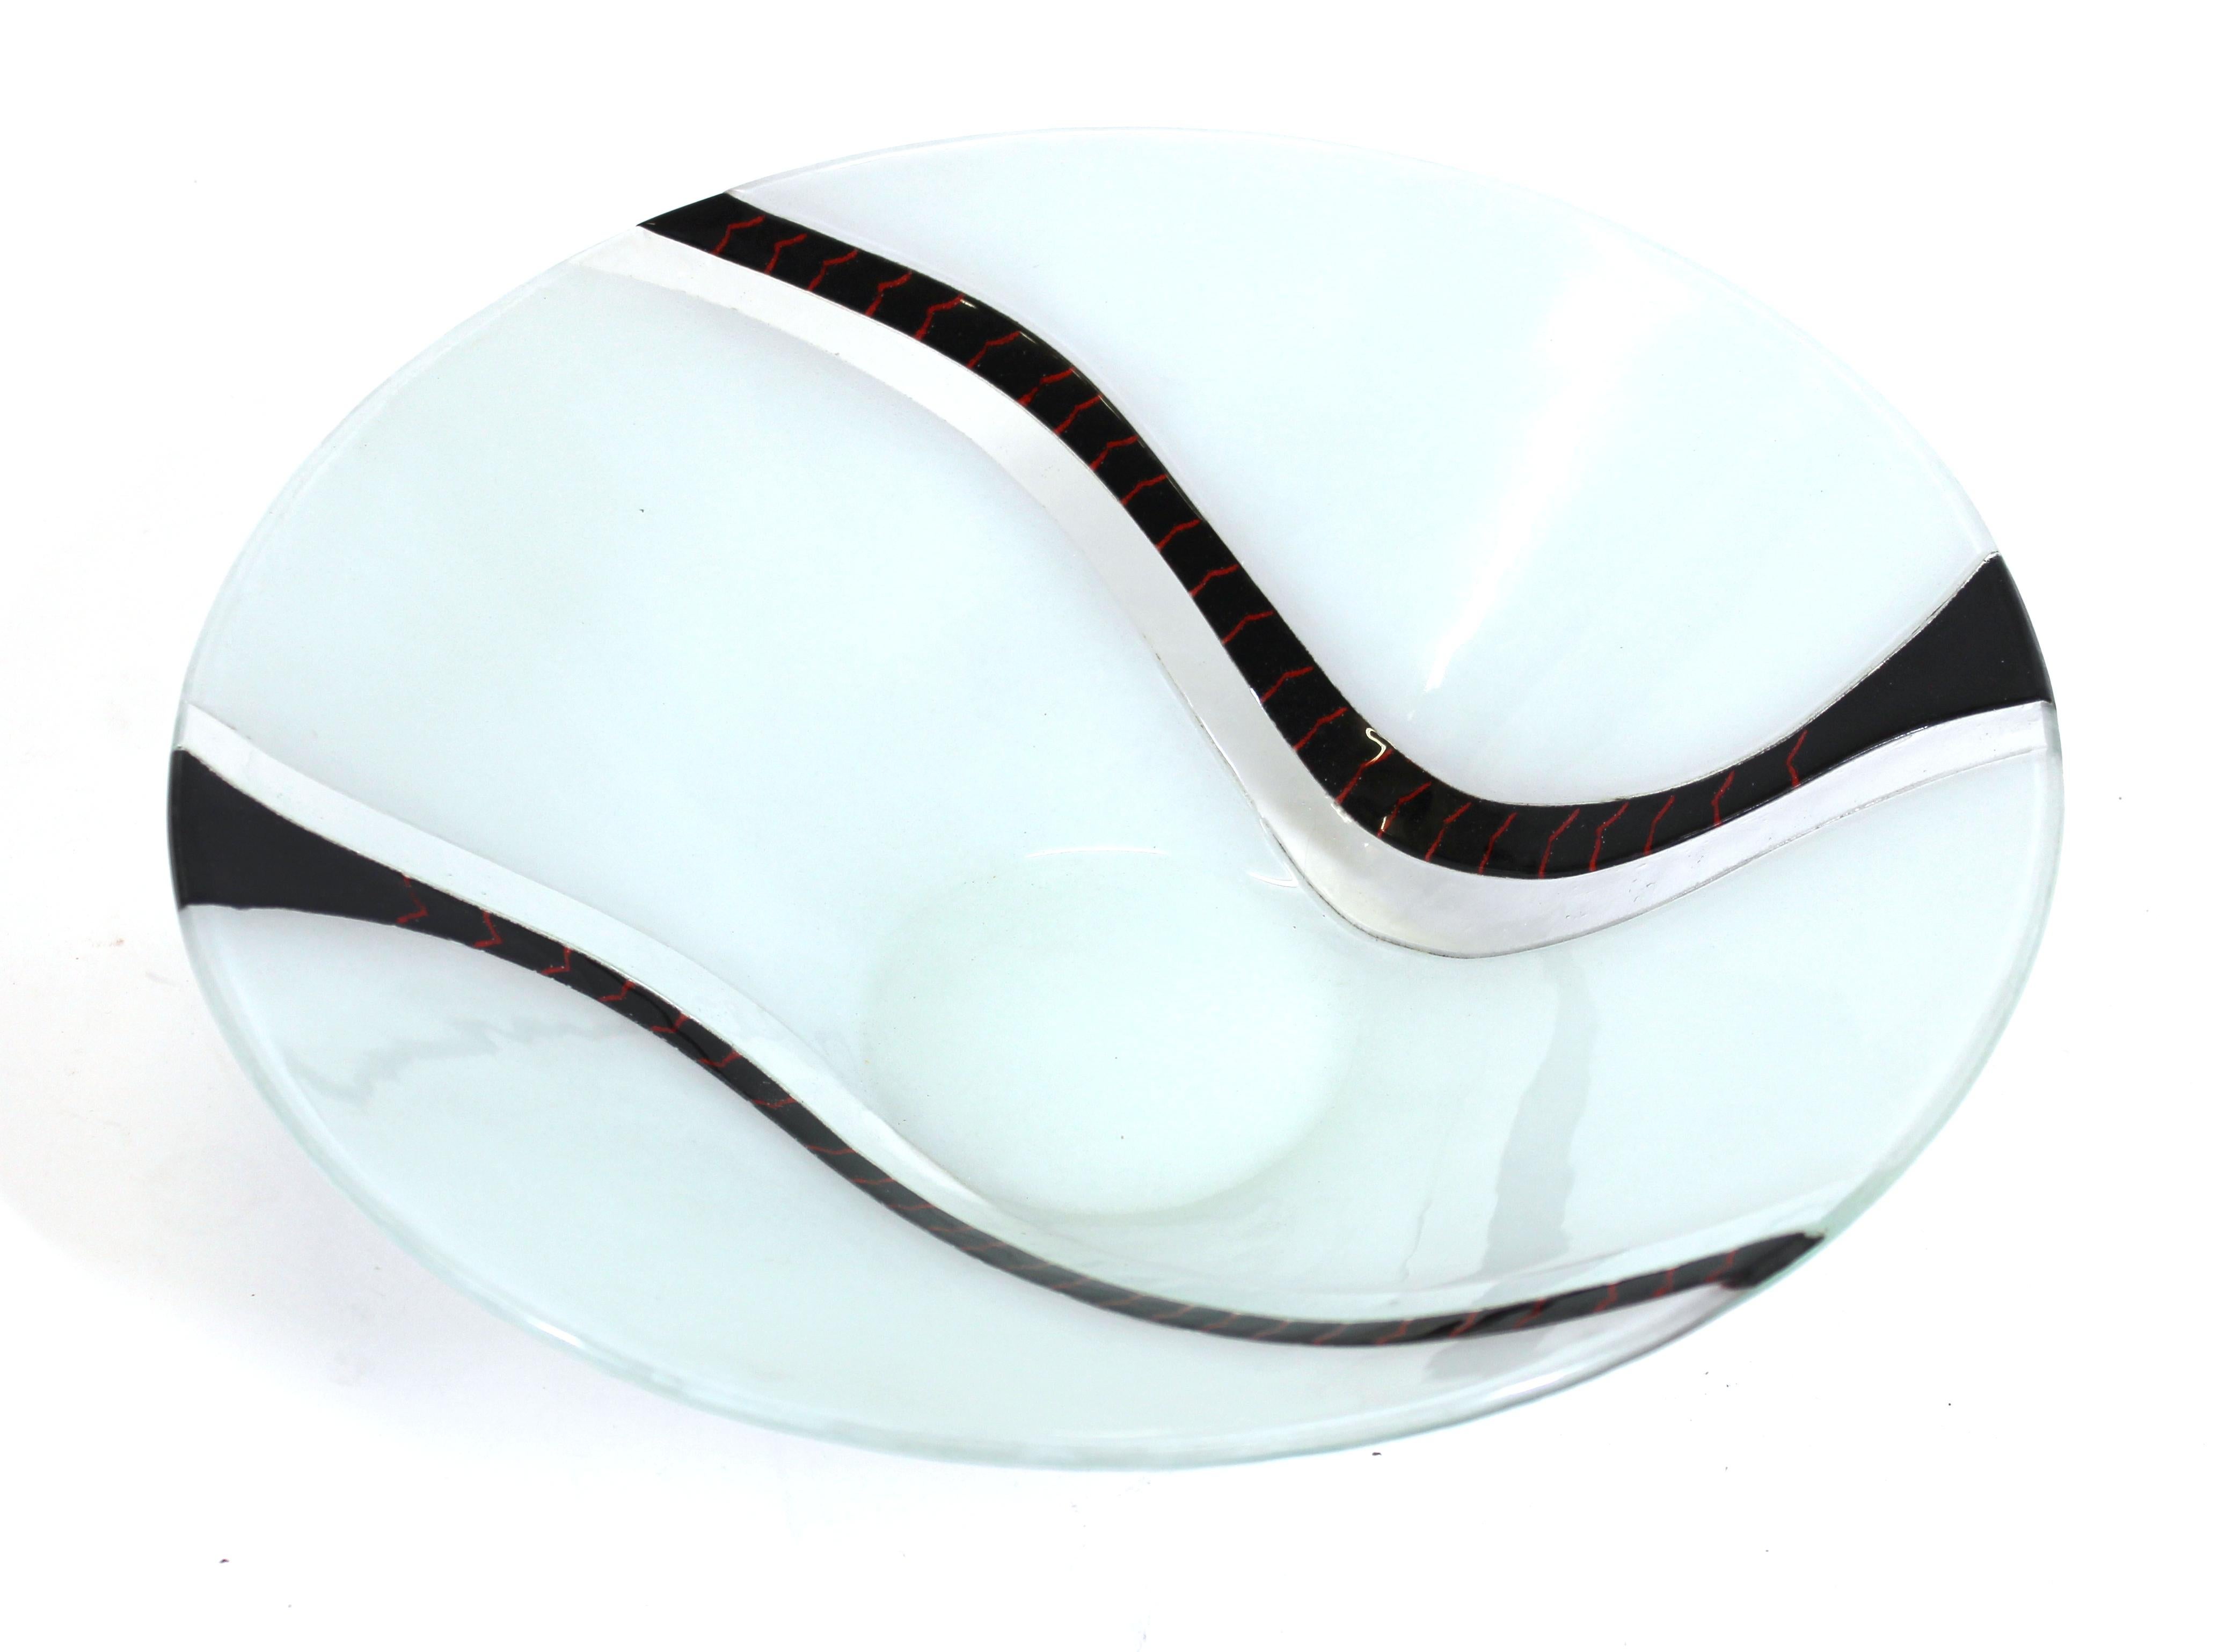 Richard L. Knopf Postmodern glass charger plate with raised relief, signed on the border.